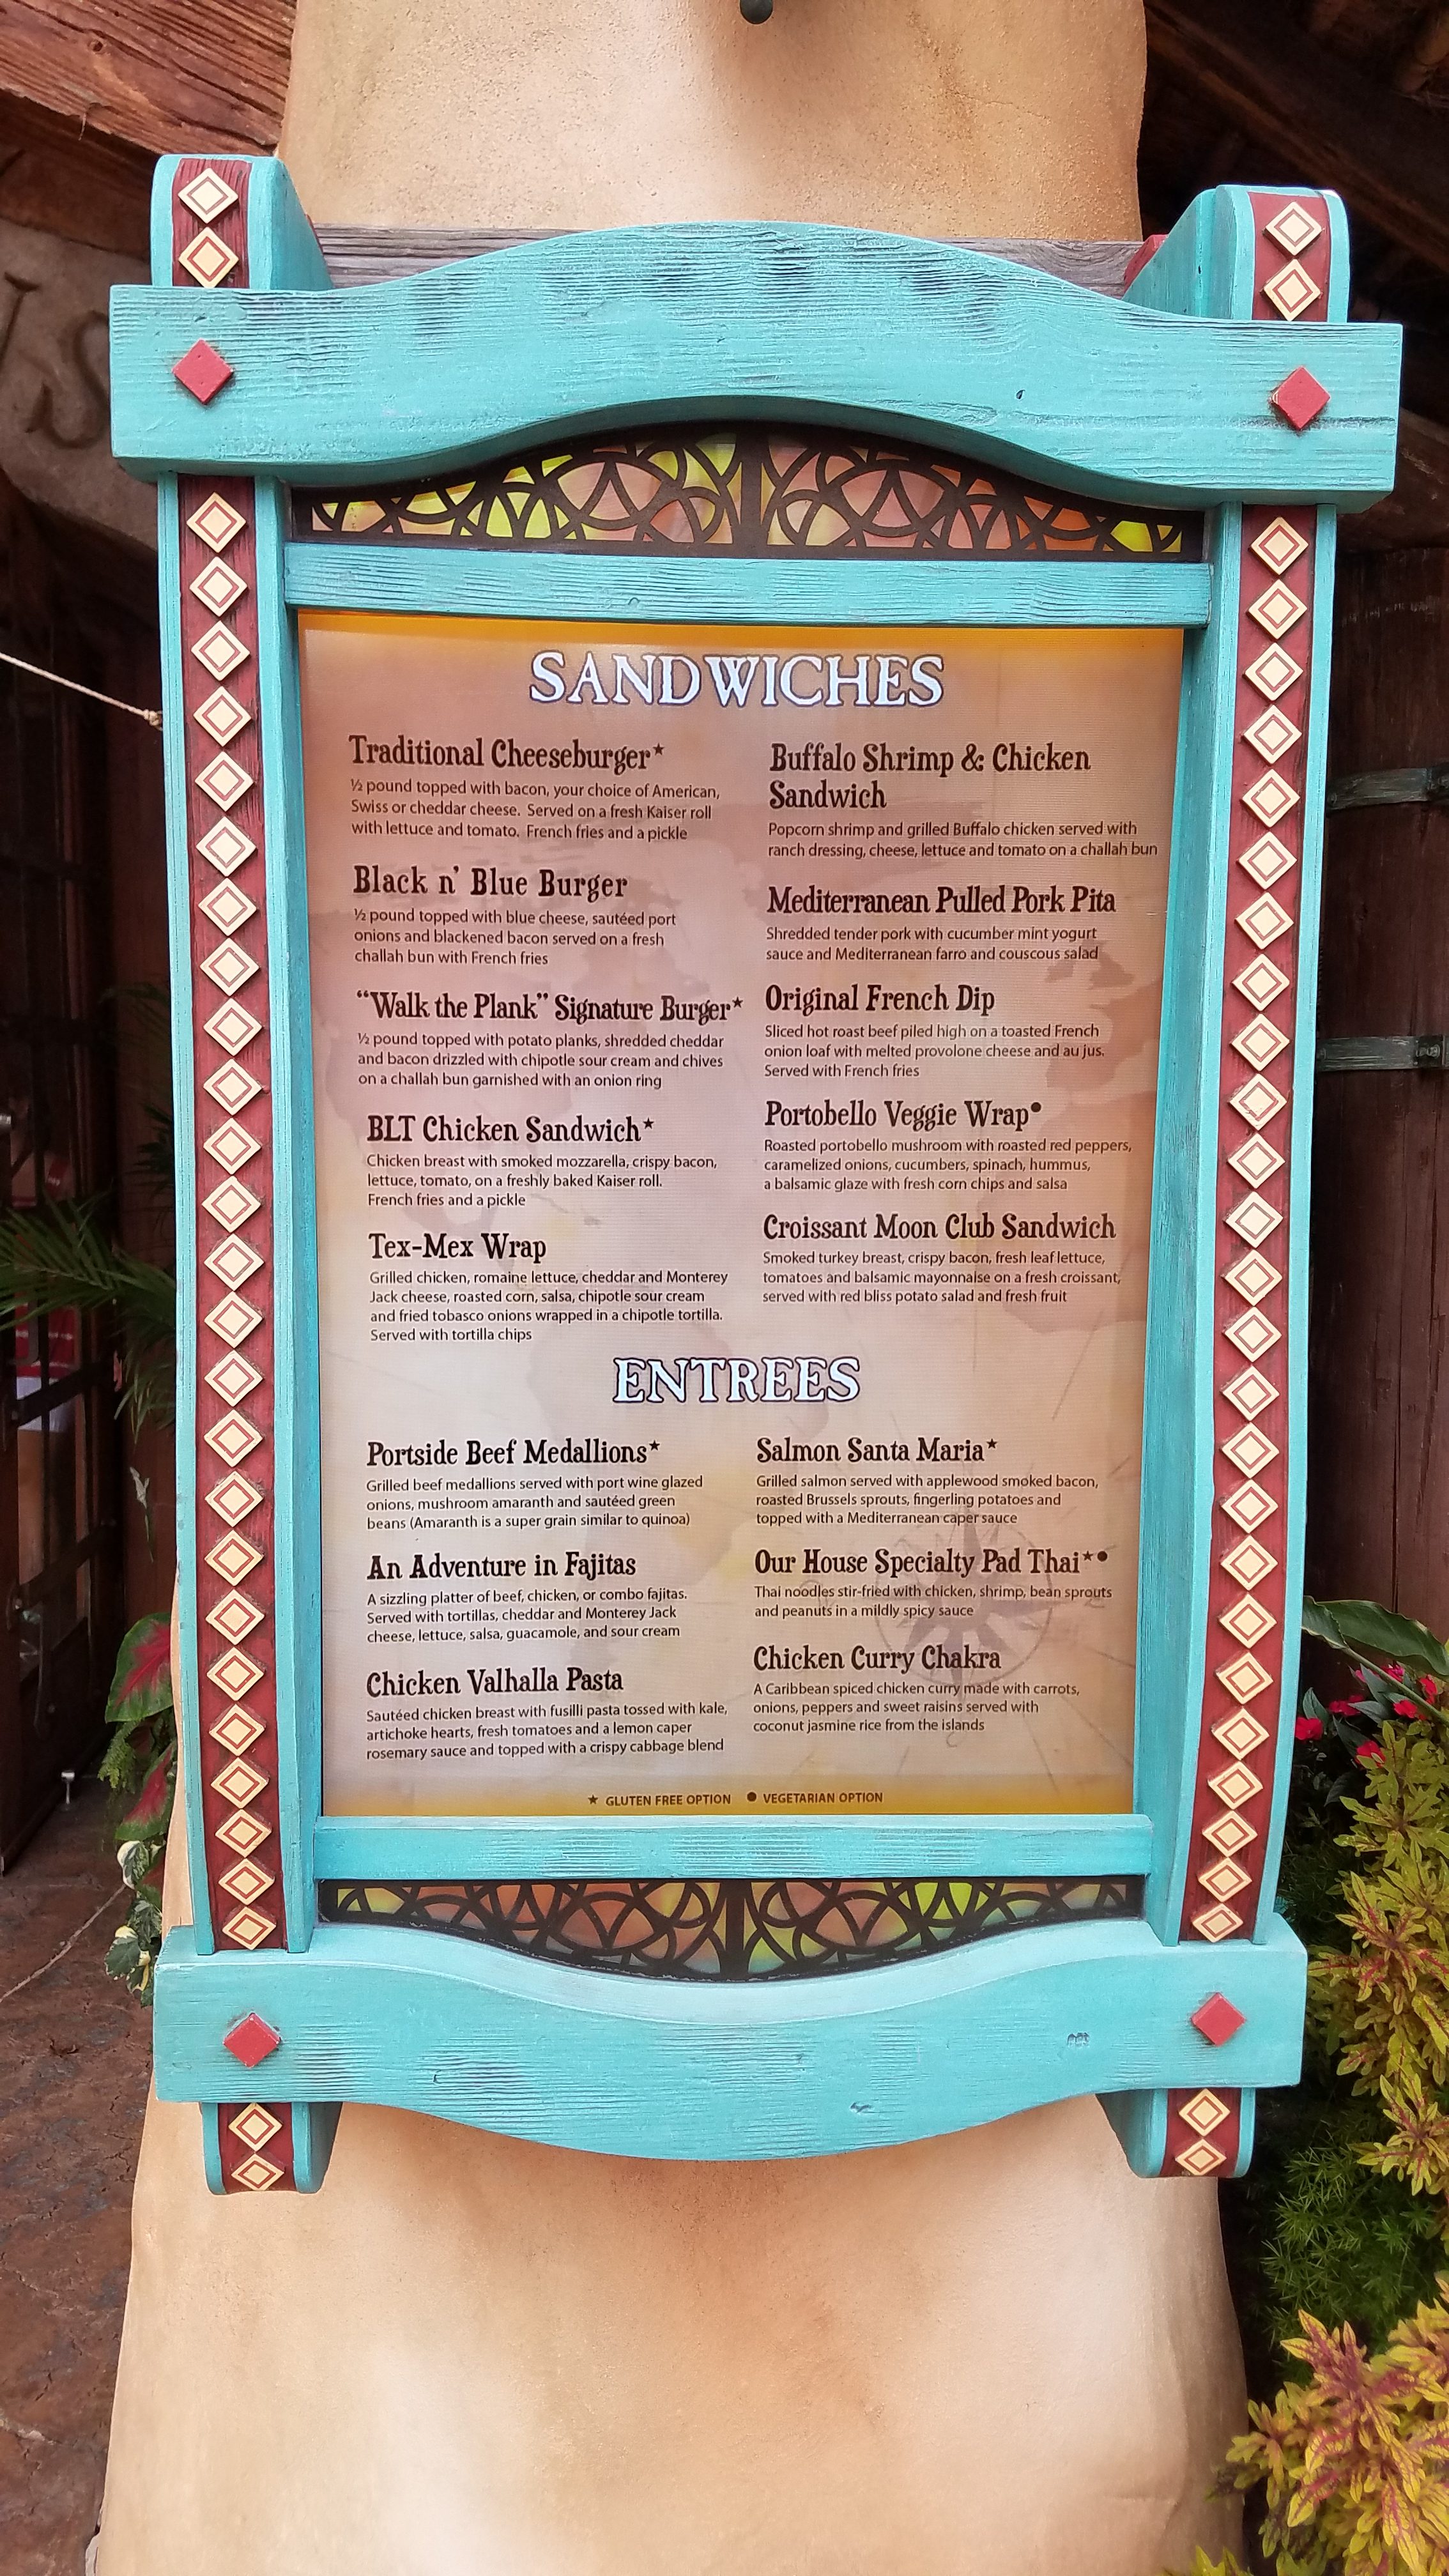 Sandwiches and Entree Menu at Confisco Grille - Dining Review - Islands of Adventure - Universal Orlando Resort - unofficialuniversal.com.